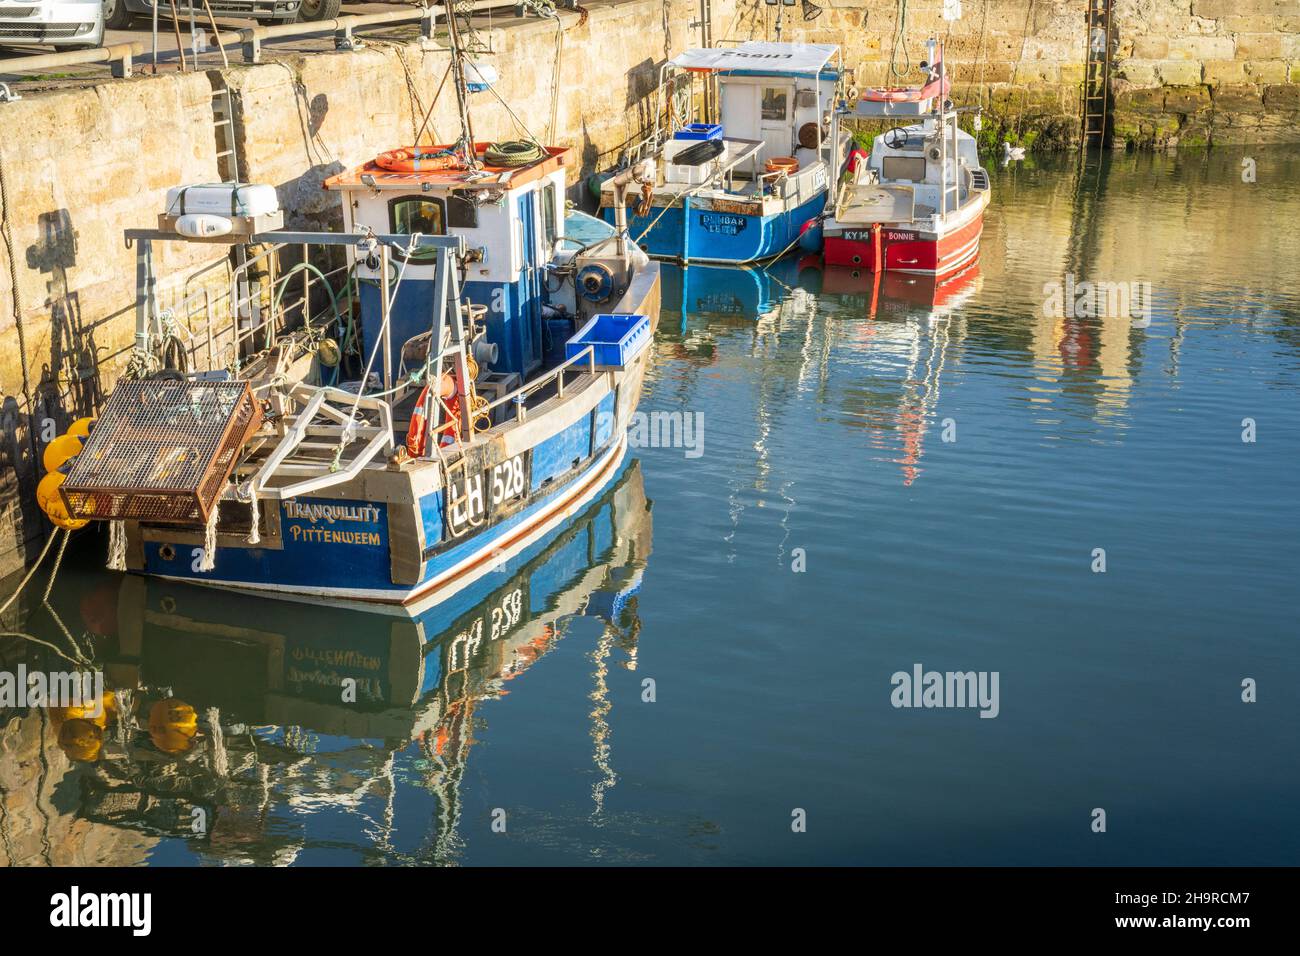 Fishing boats moored in the harbour at Pittenweem, Nuke of Fife, Scotland. Stock Photo